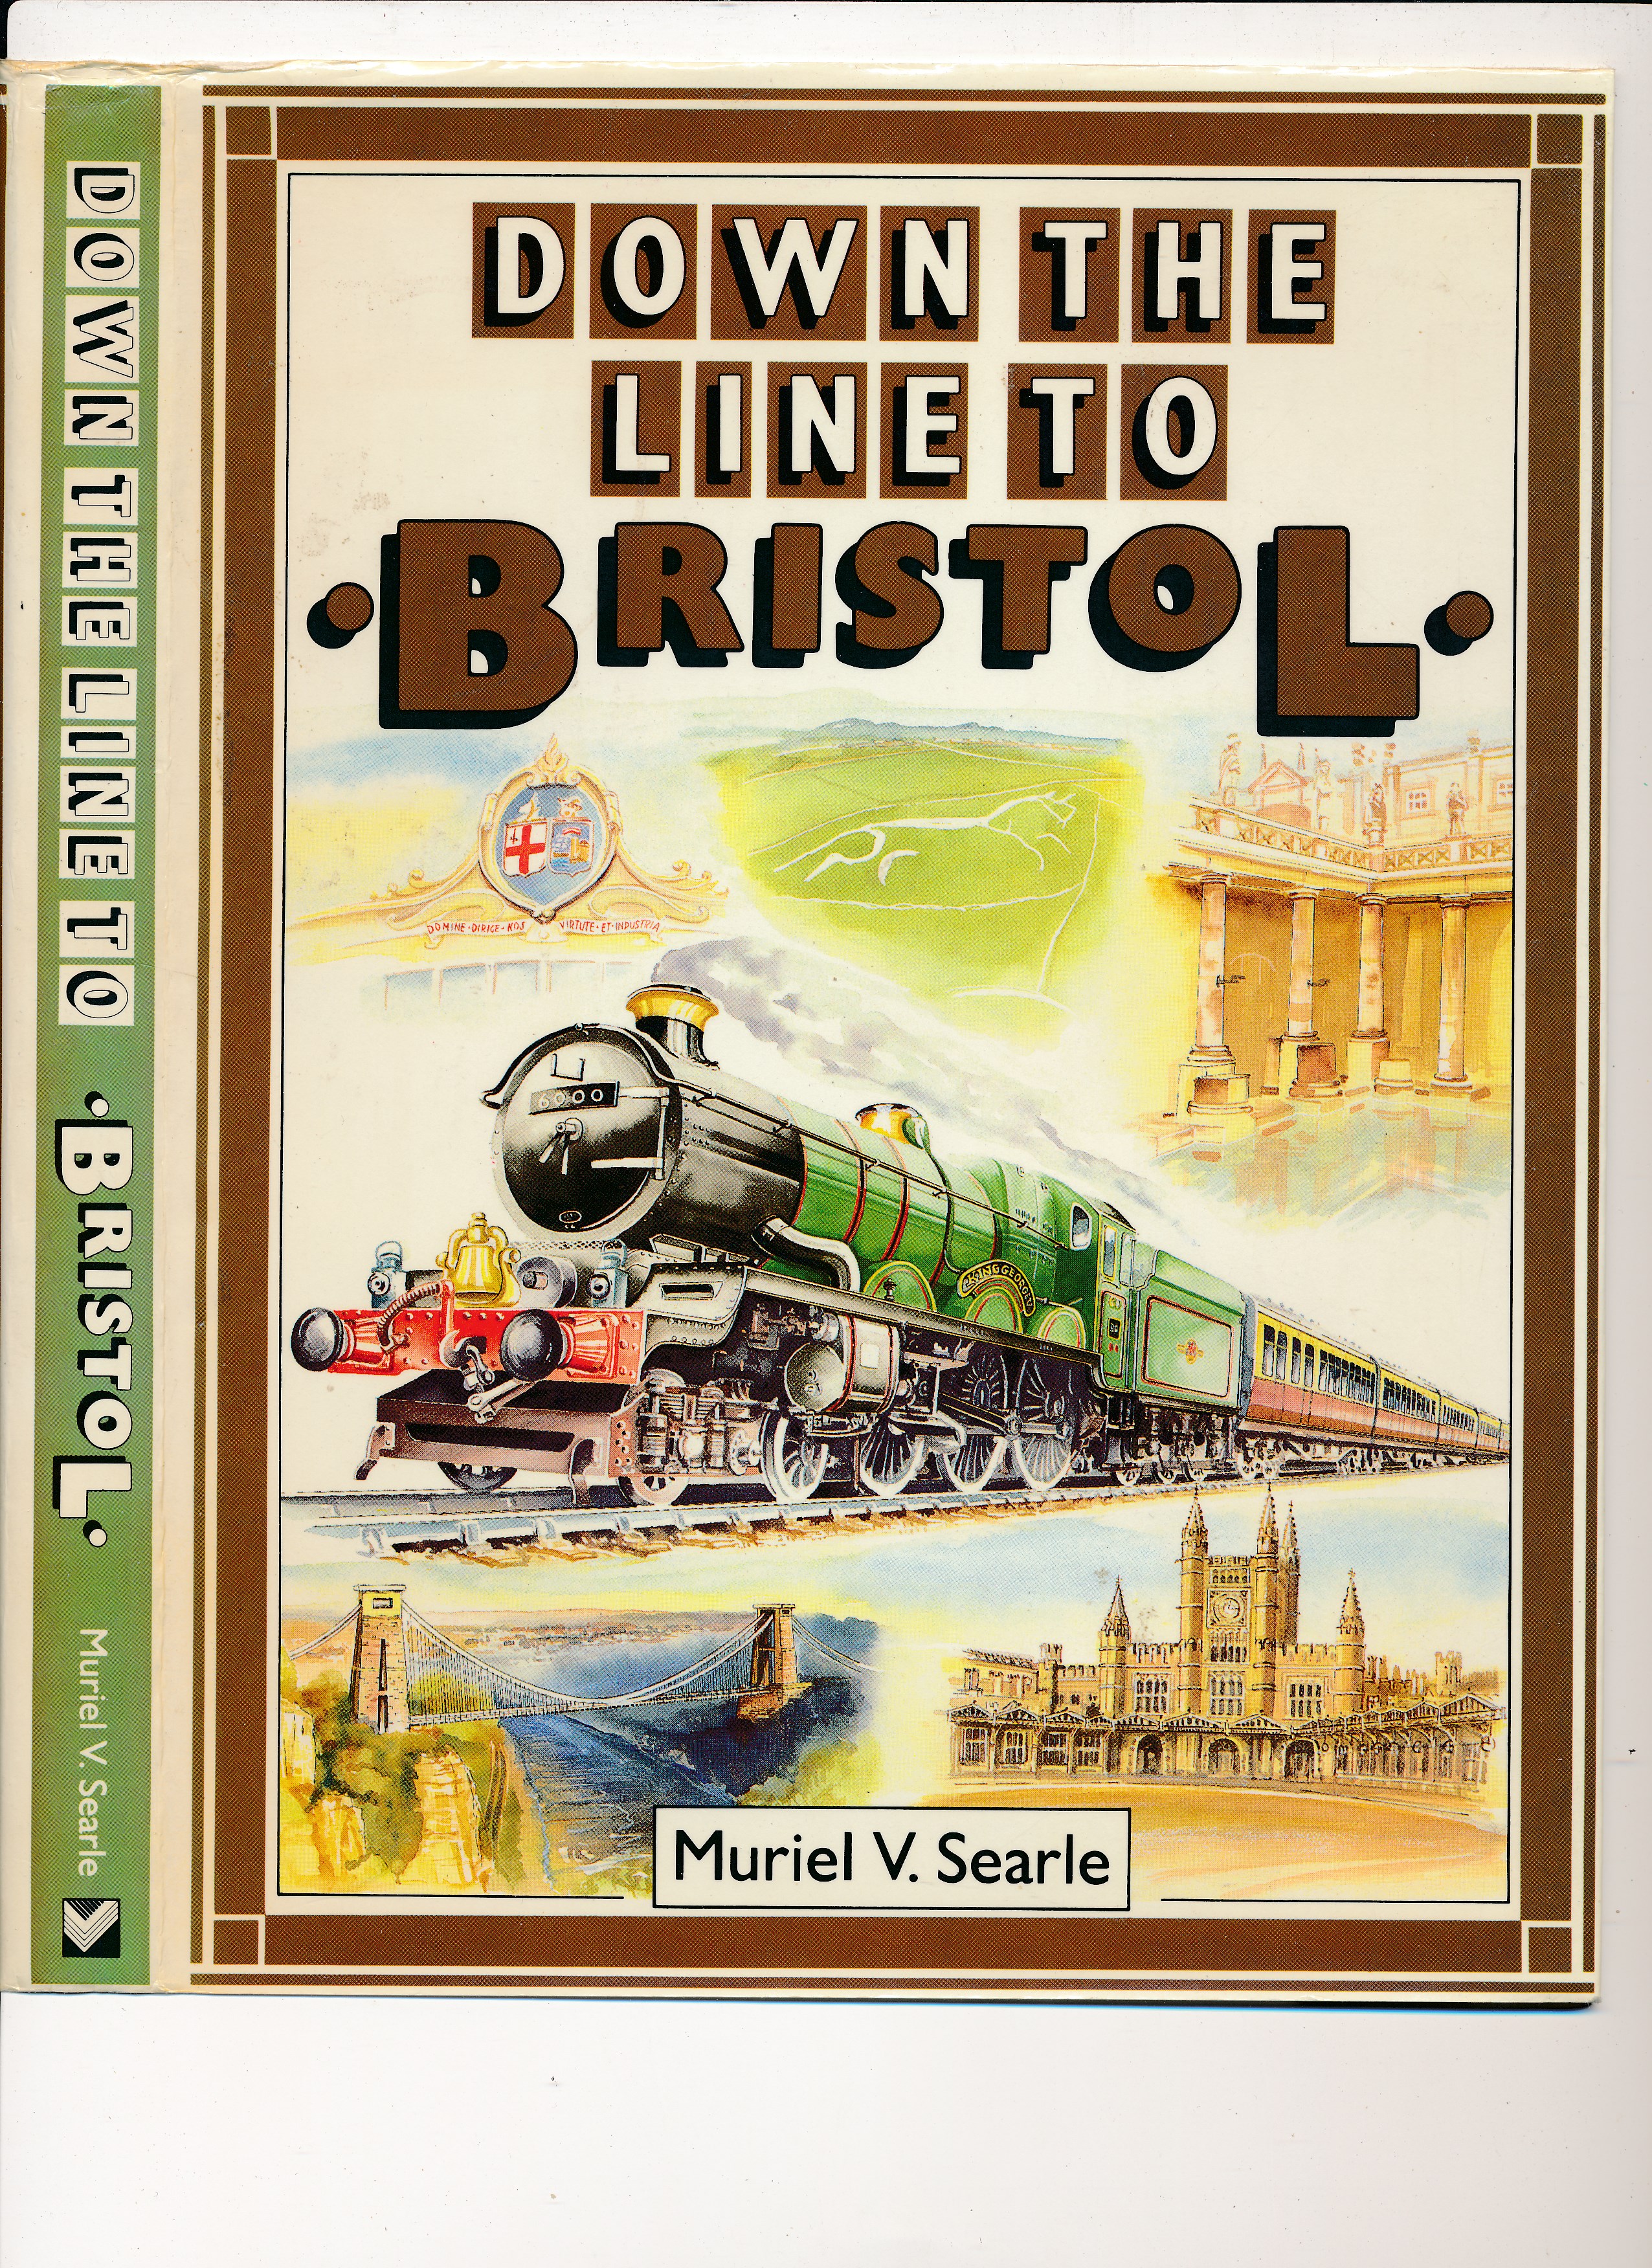 Down The Line To Bristol - Muriel V. Searle